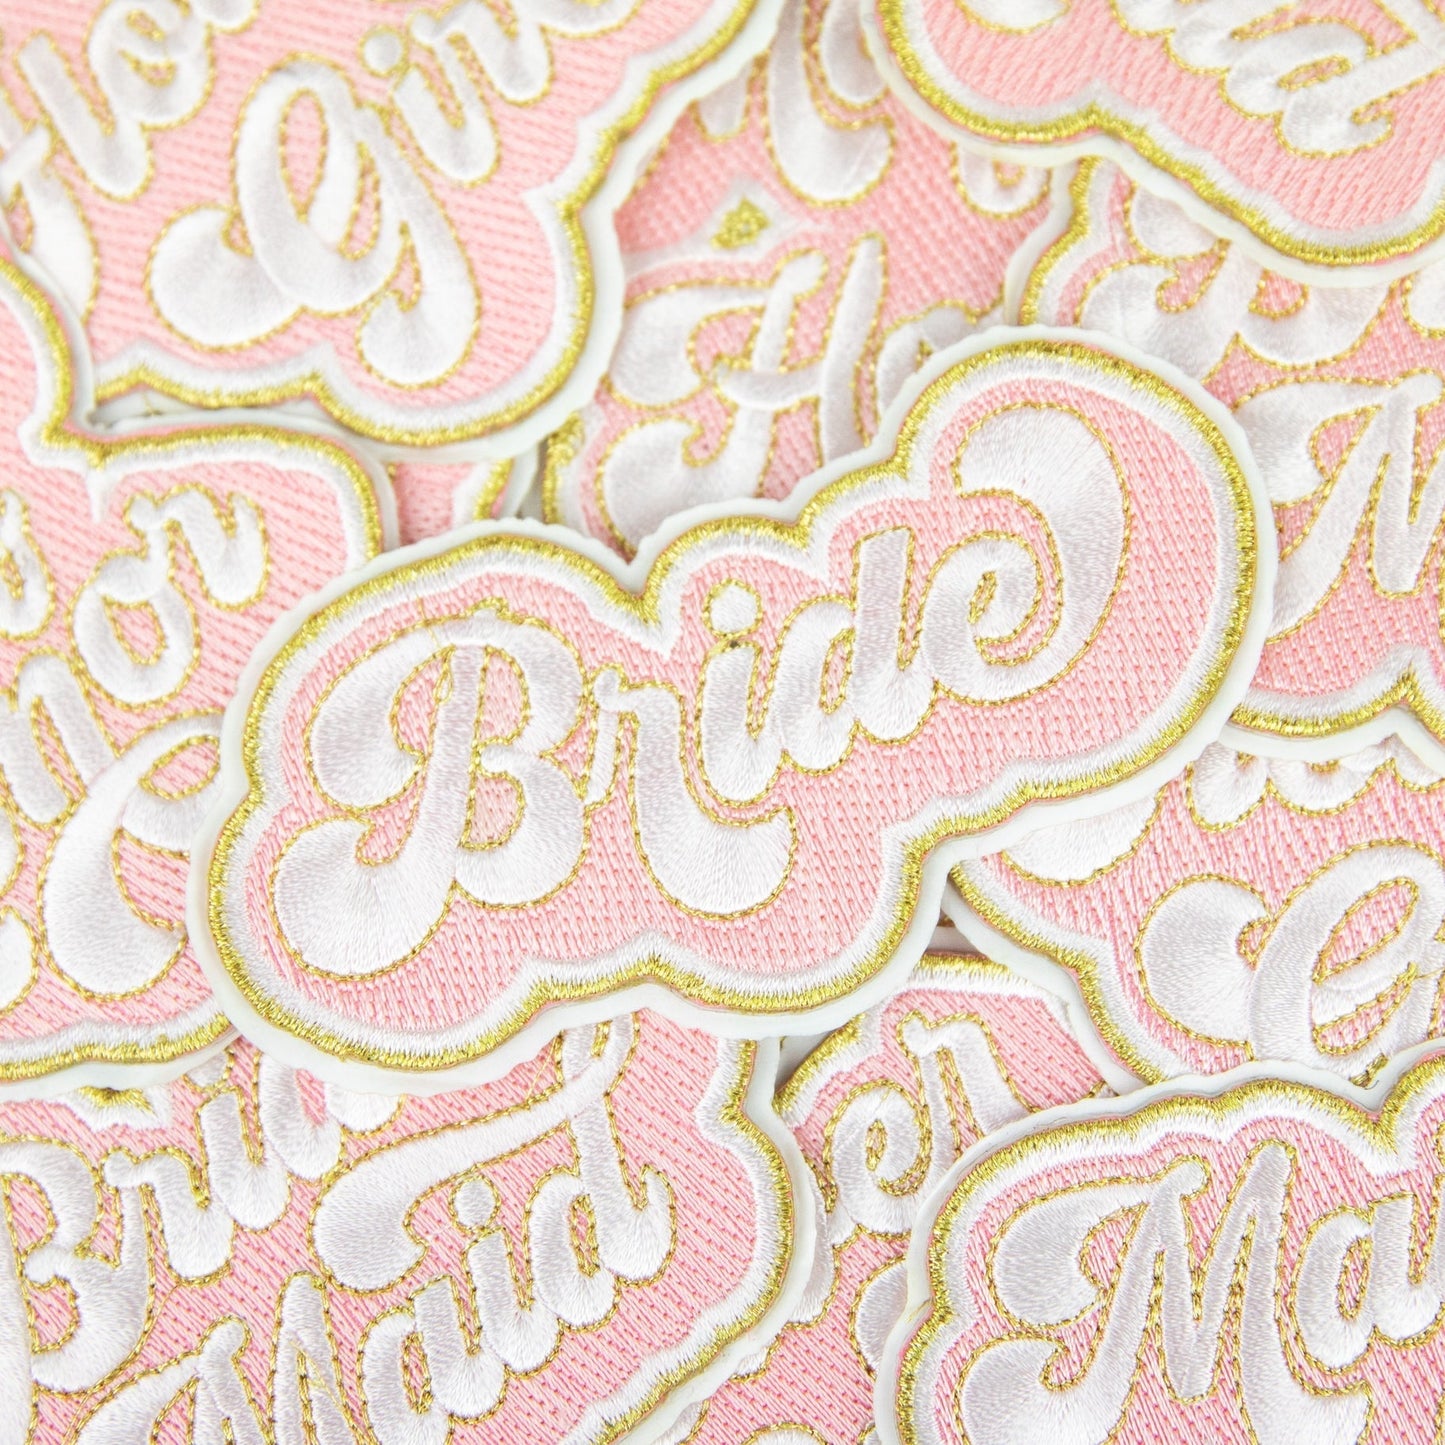 Bride - Bridal Patch Embroidered Adhesive